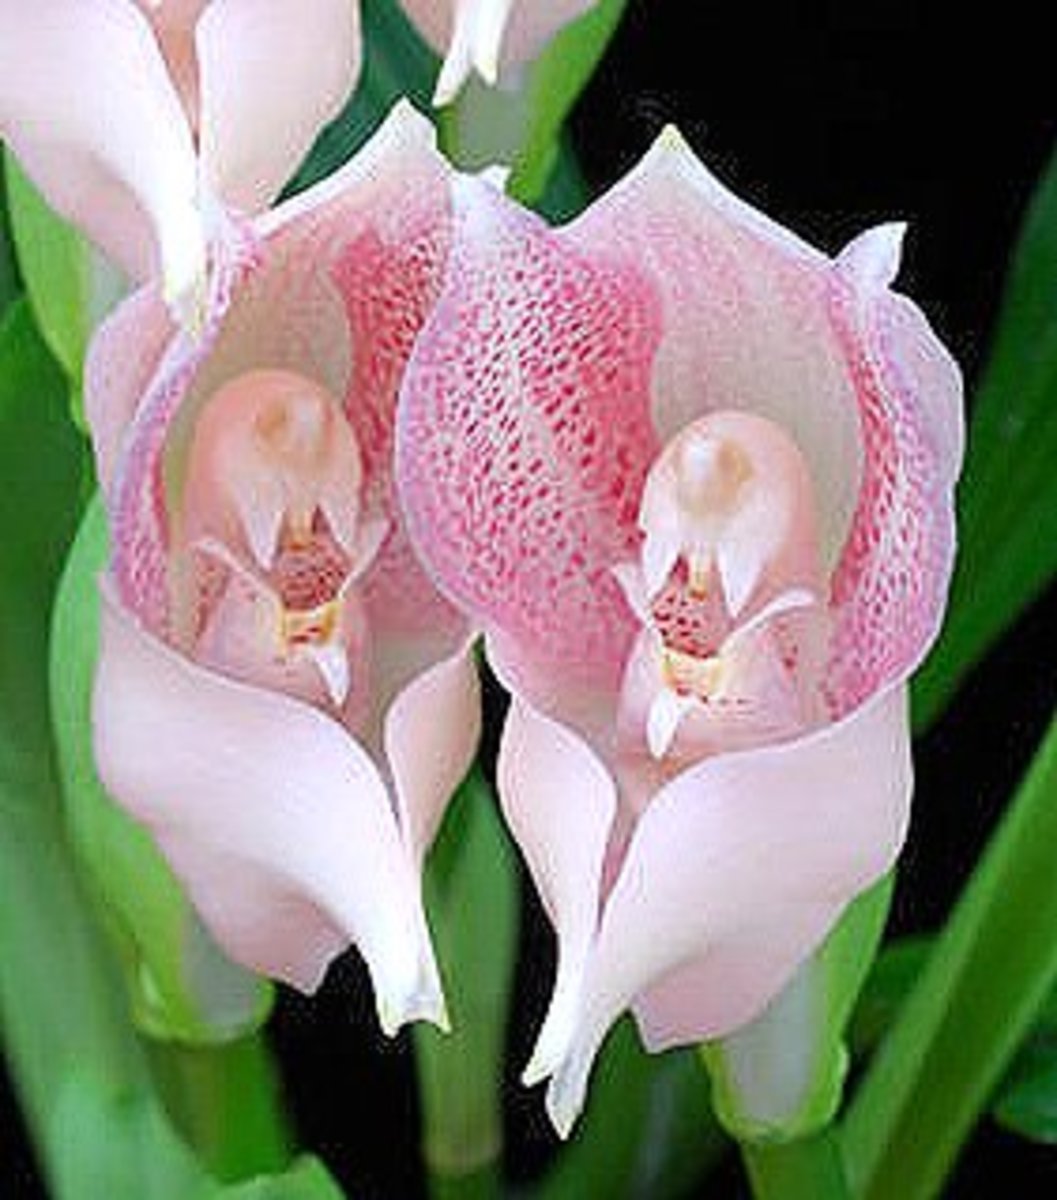 Tulip orchids look like they are cradling babies.